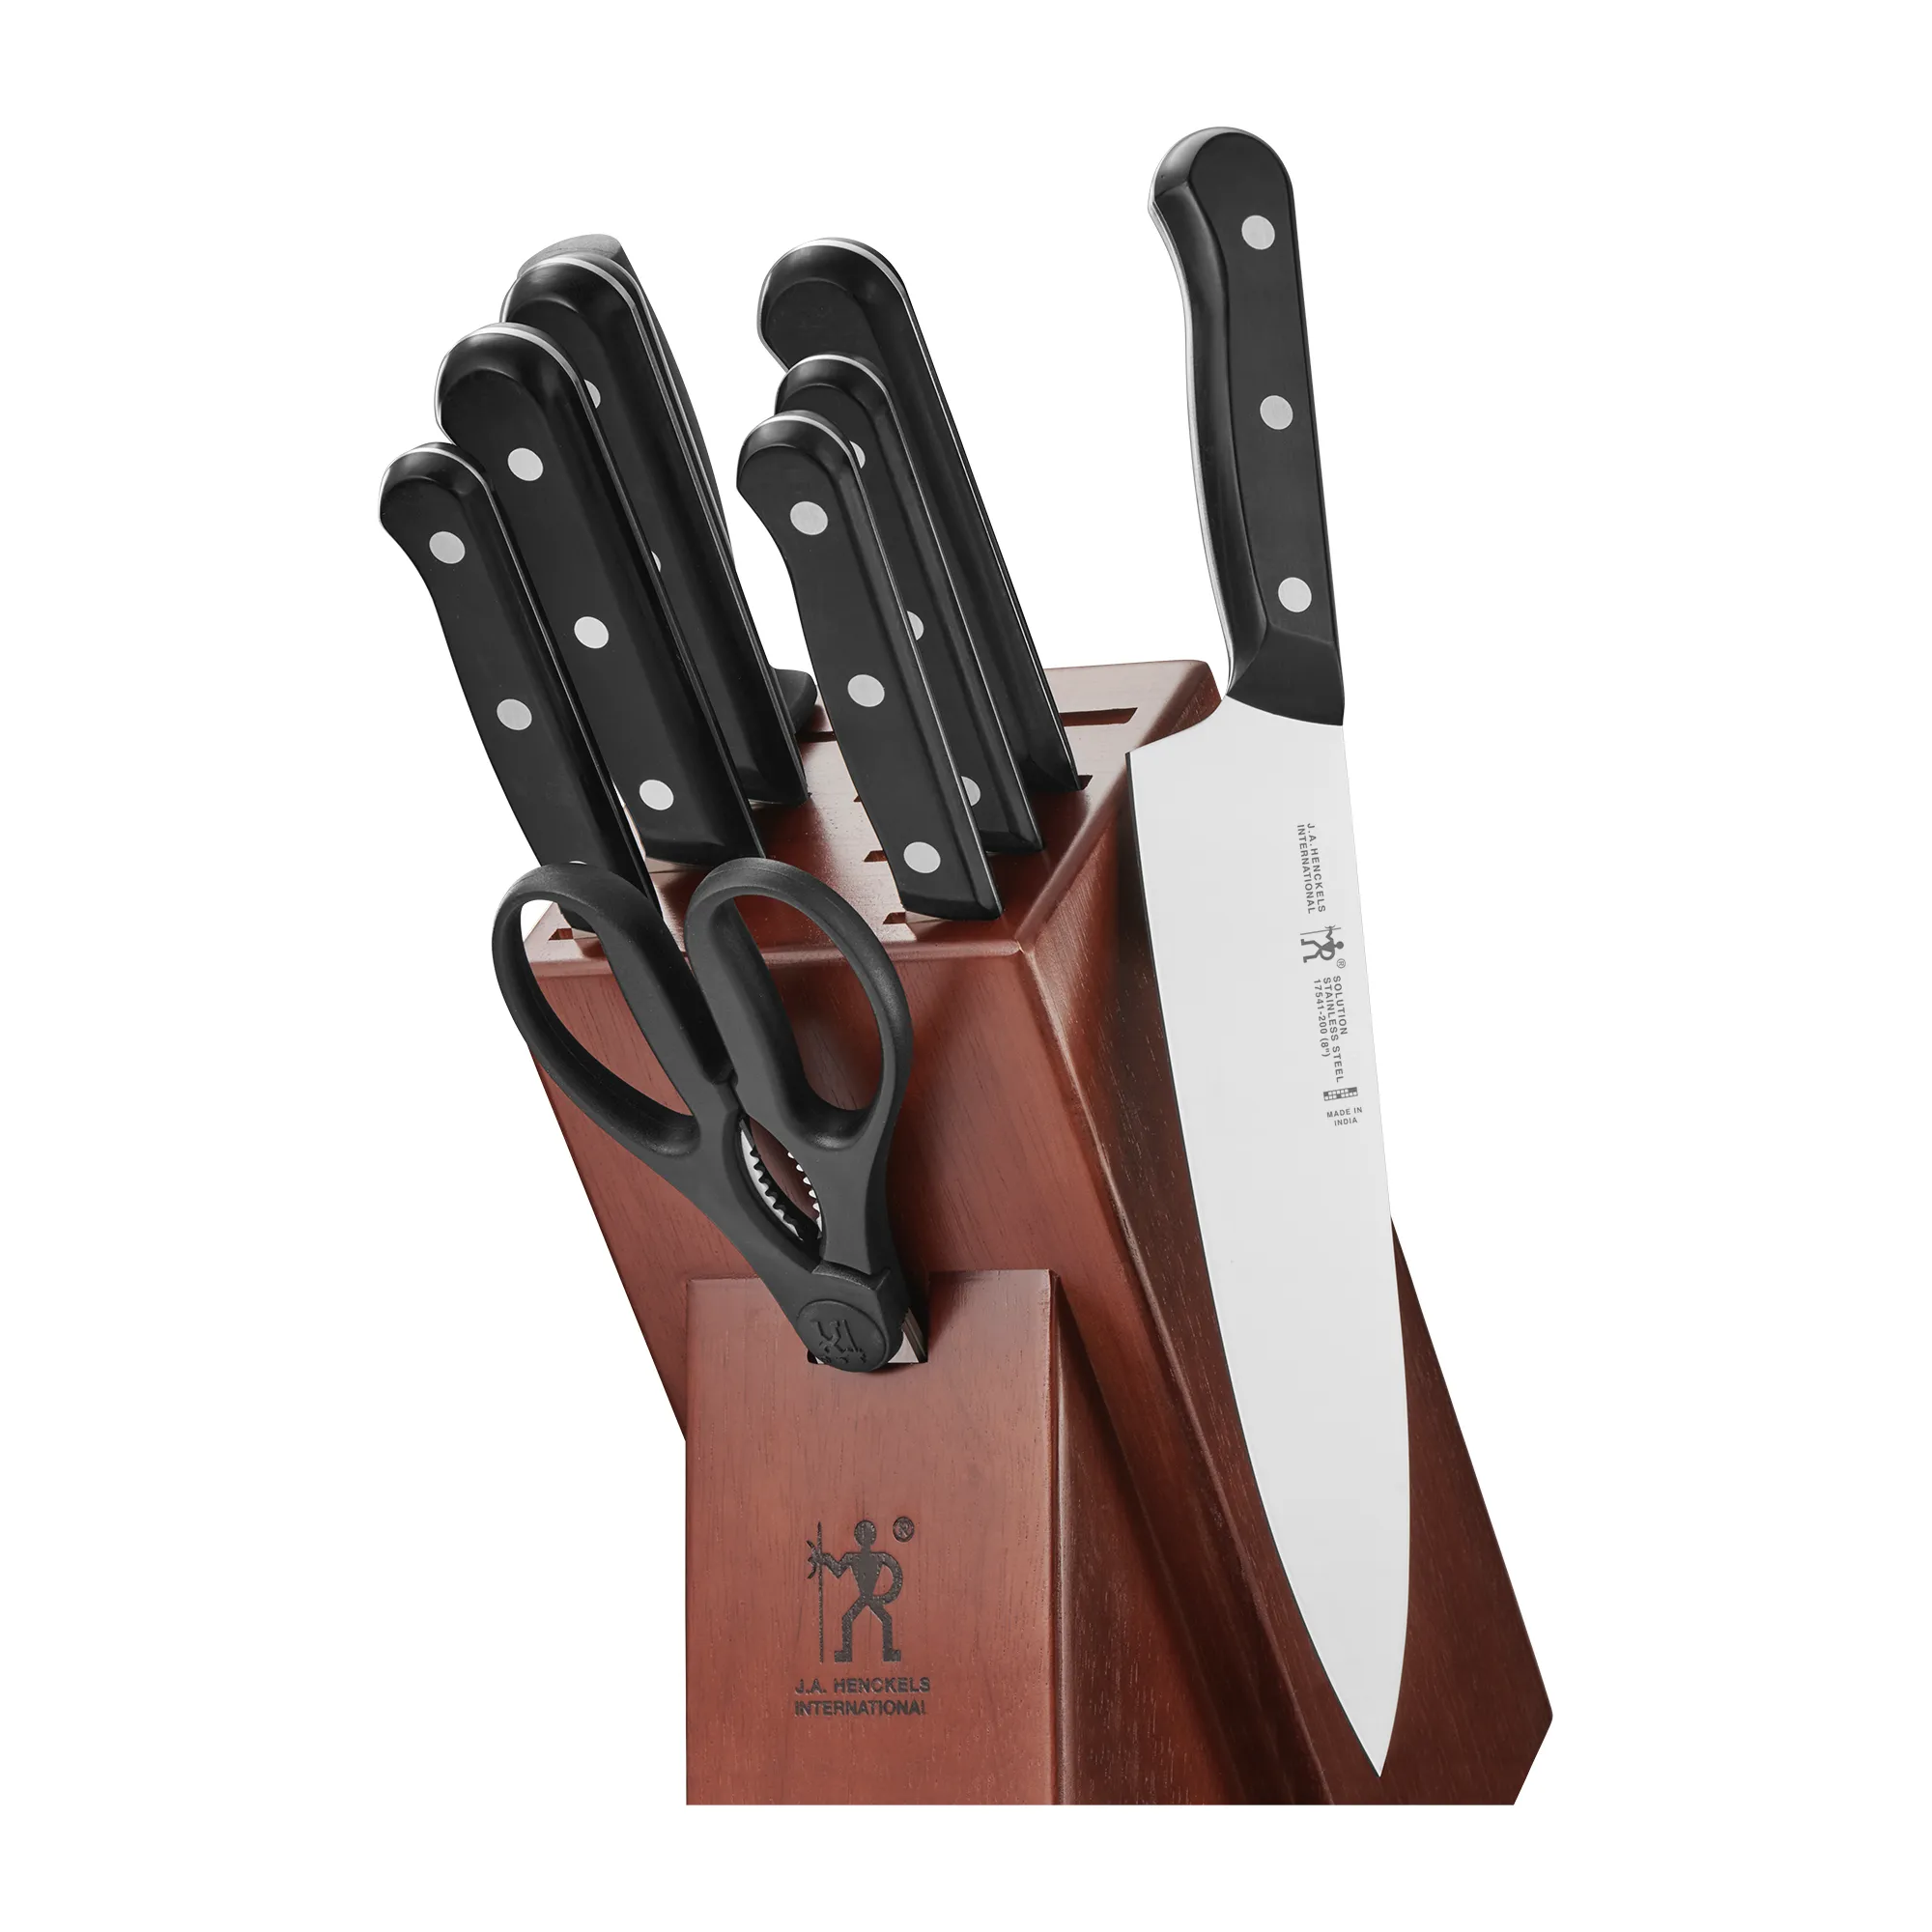 https://www.homethreads.com/files/zwilling/17553-010-henckels-solution-10-pc-knife-set-with-block-chef-knife-paring-knife-utility-knife-bread-knife-black-stainless-steel.webp